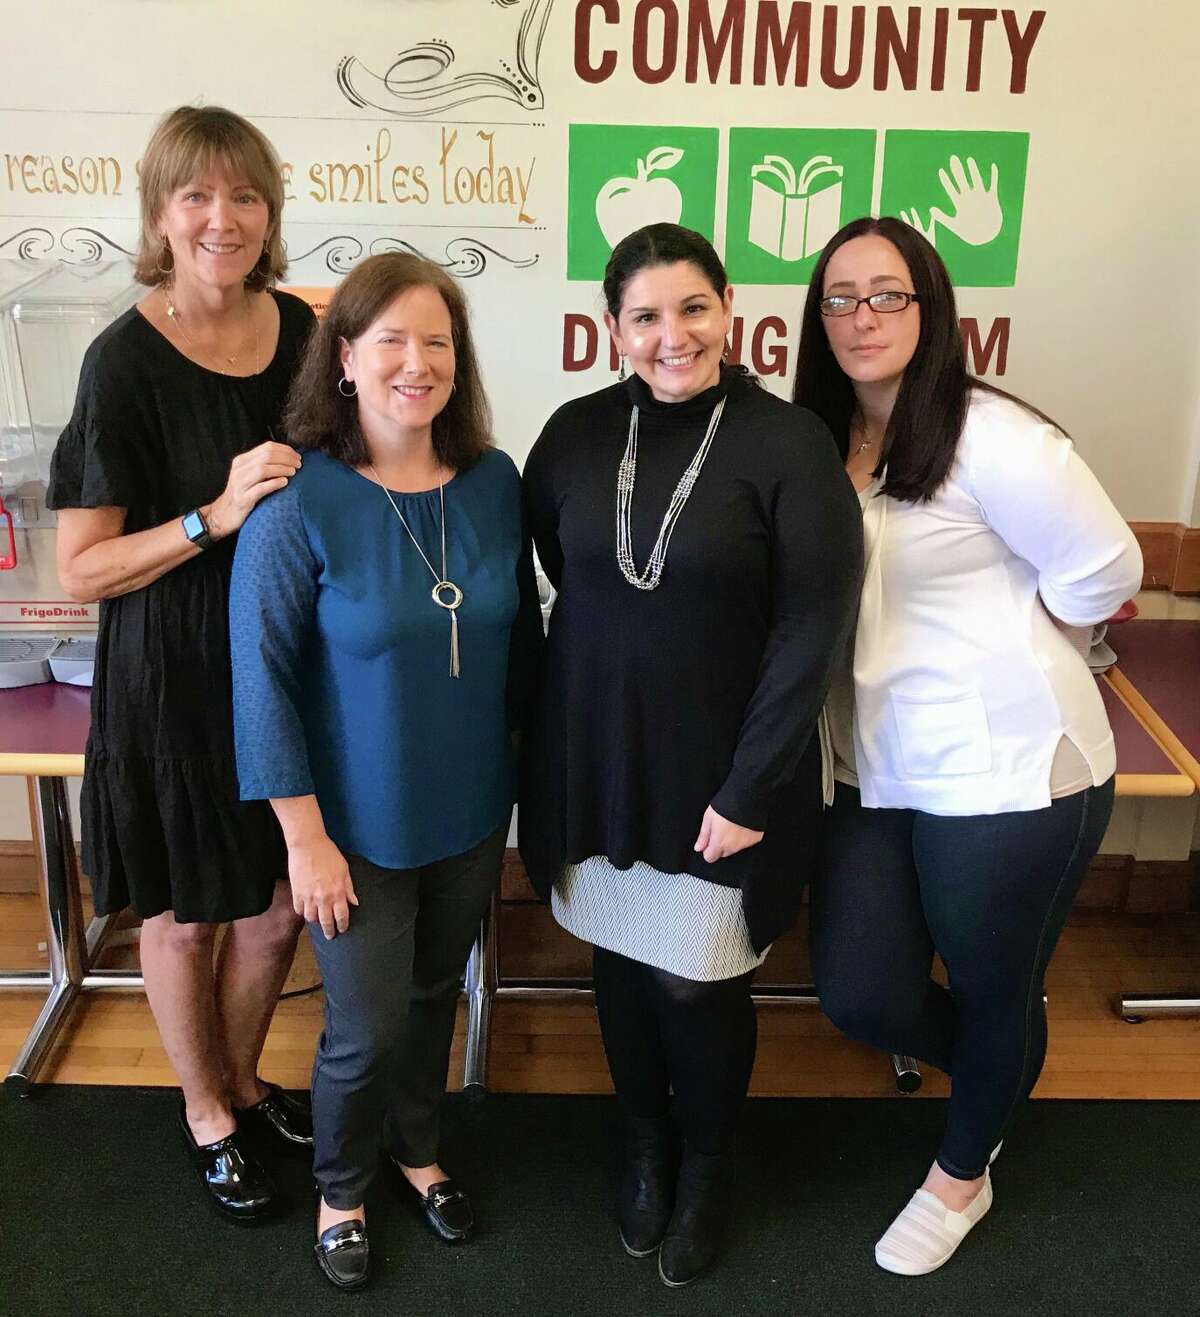 CDR kitchen coordinator Mary Johnston, volunteer coordinator Marie Mordarski, executive director Judy Barron, and administrative assistant Diana Vaicunas on a recent morning at the Community Dining Room.